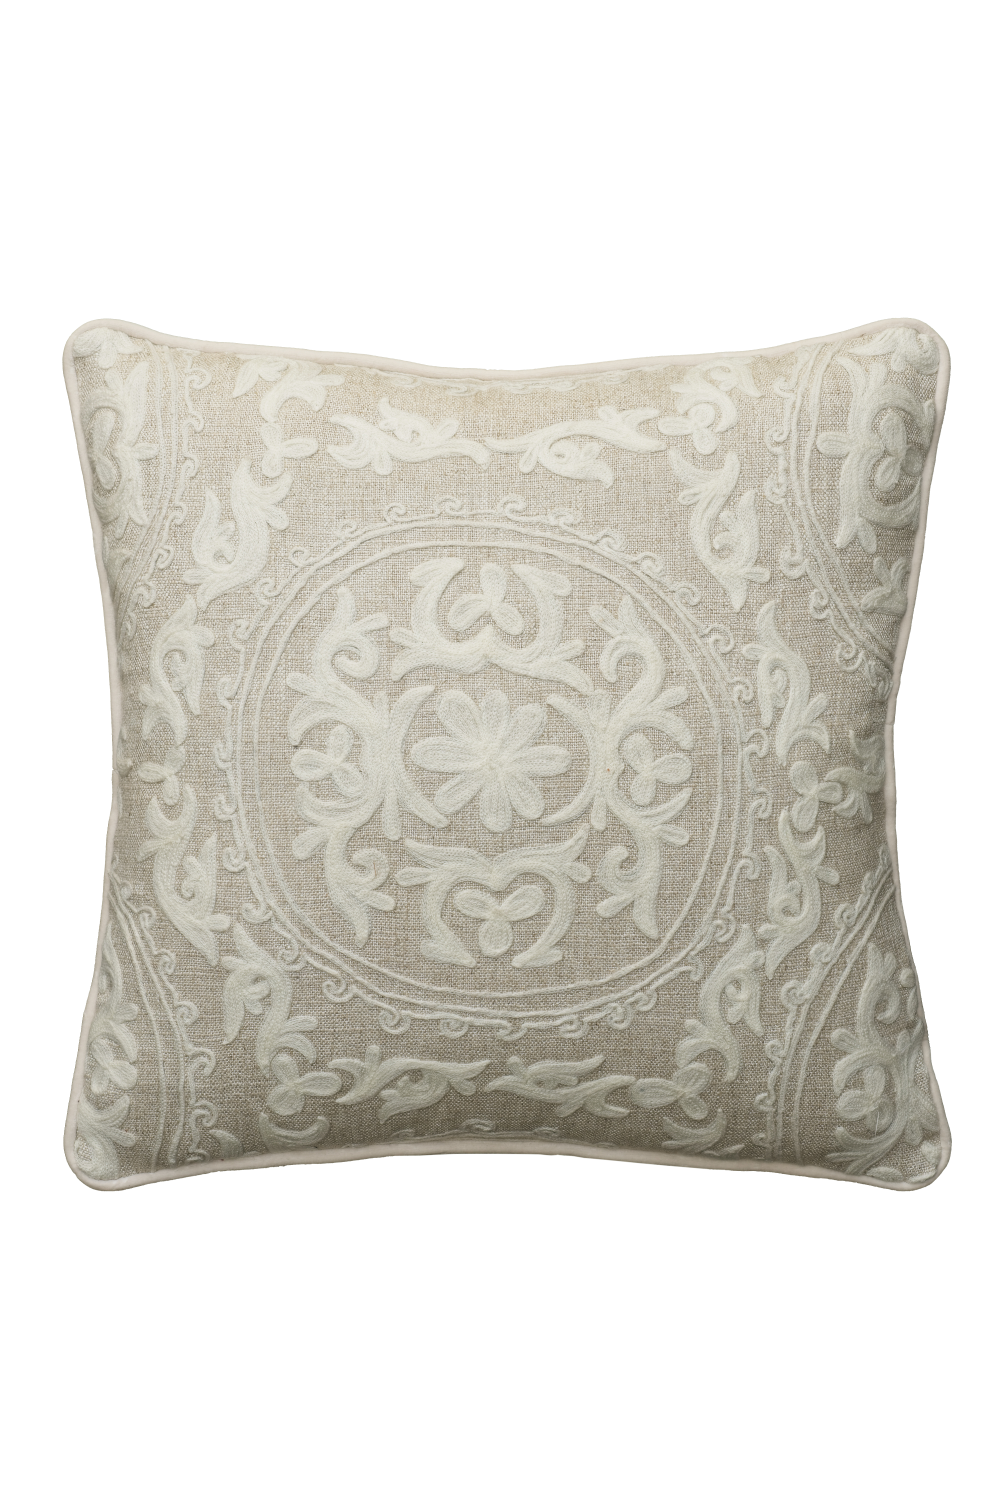 Floral Embroidered Linen Cushion | Andrew Martin Yurt | Oroa.com